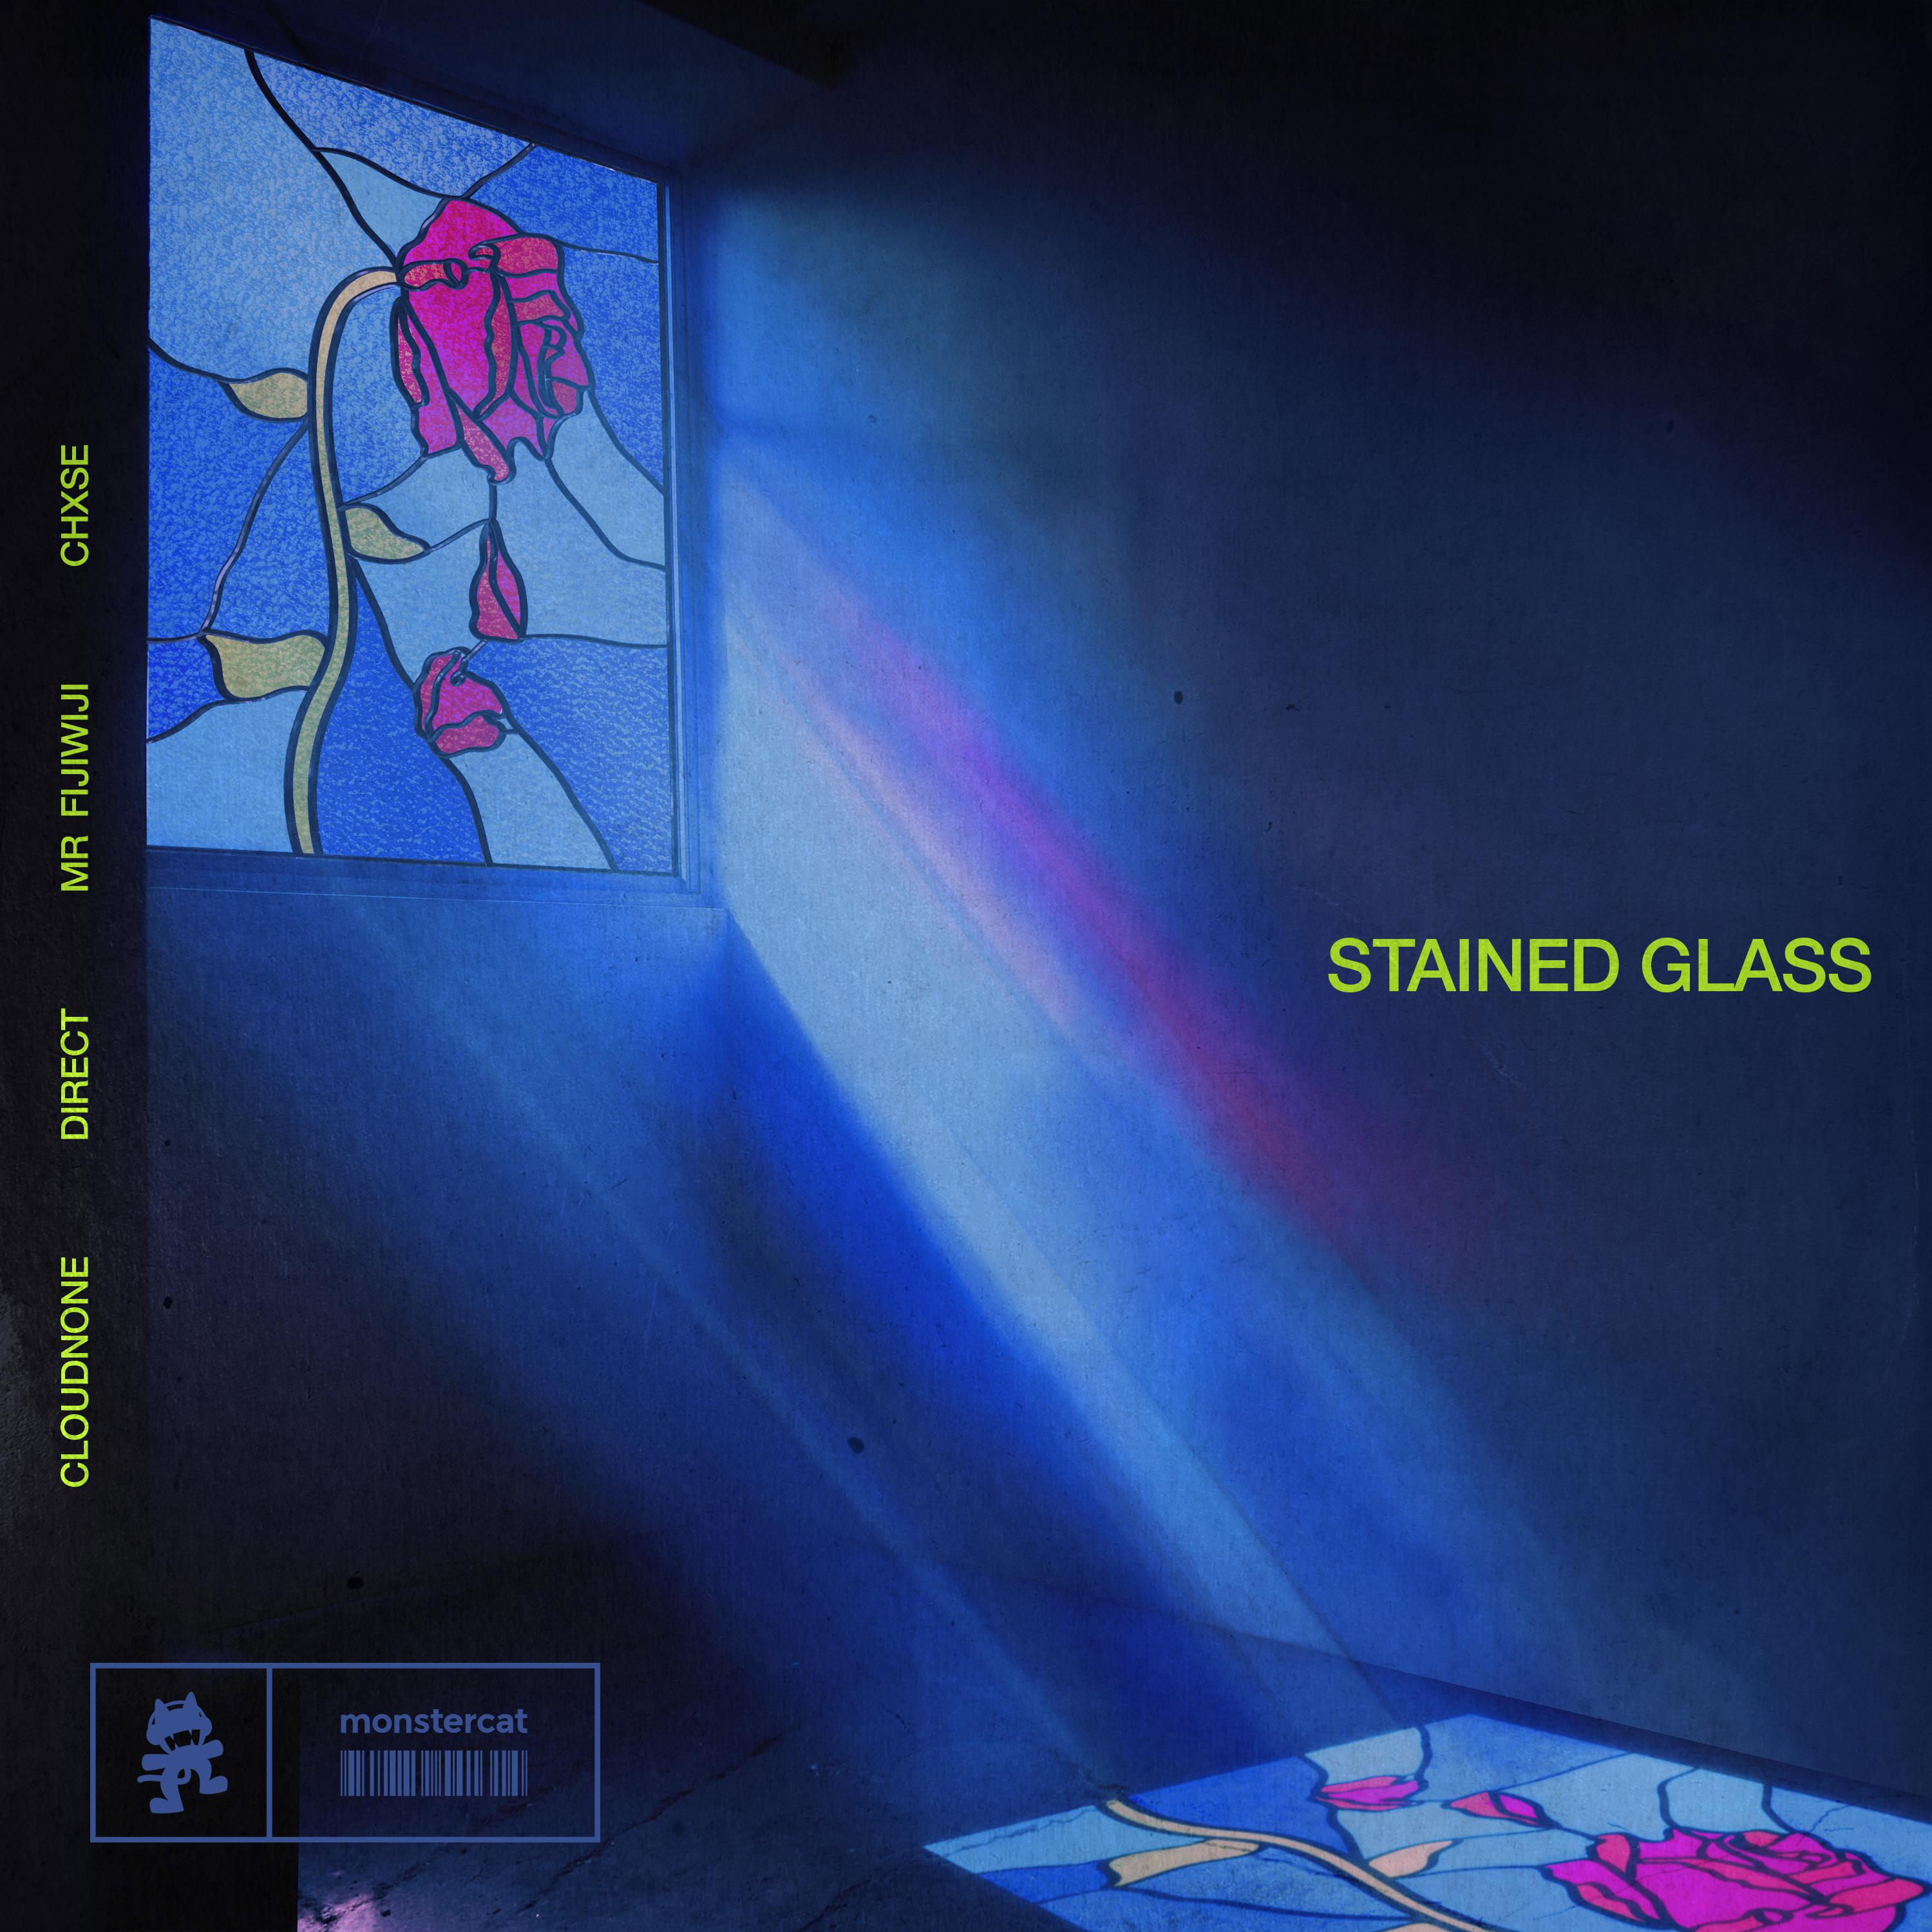 Chxse - Stained Glass